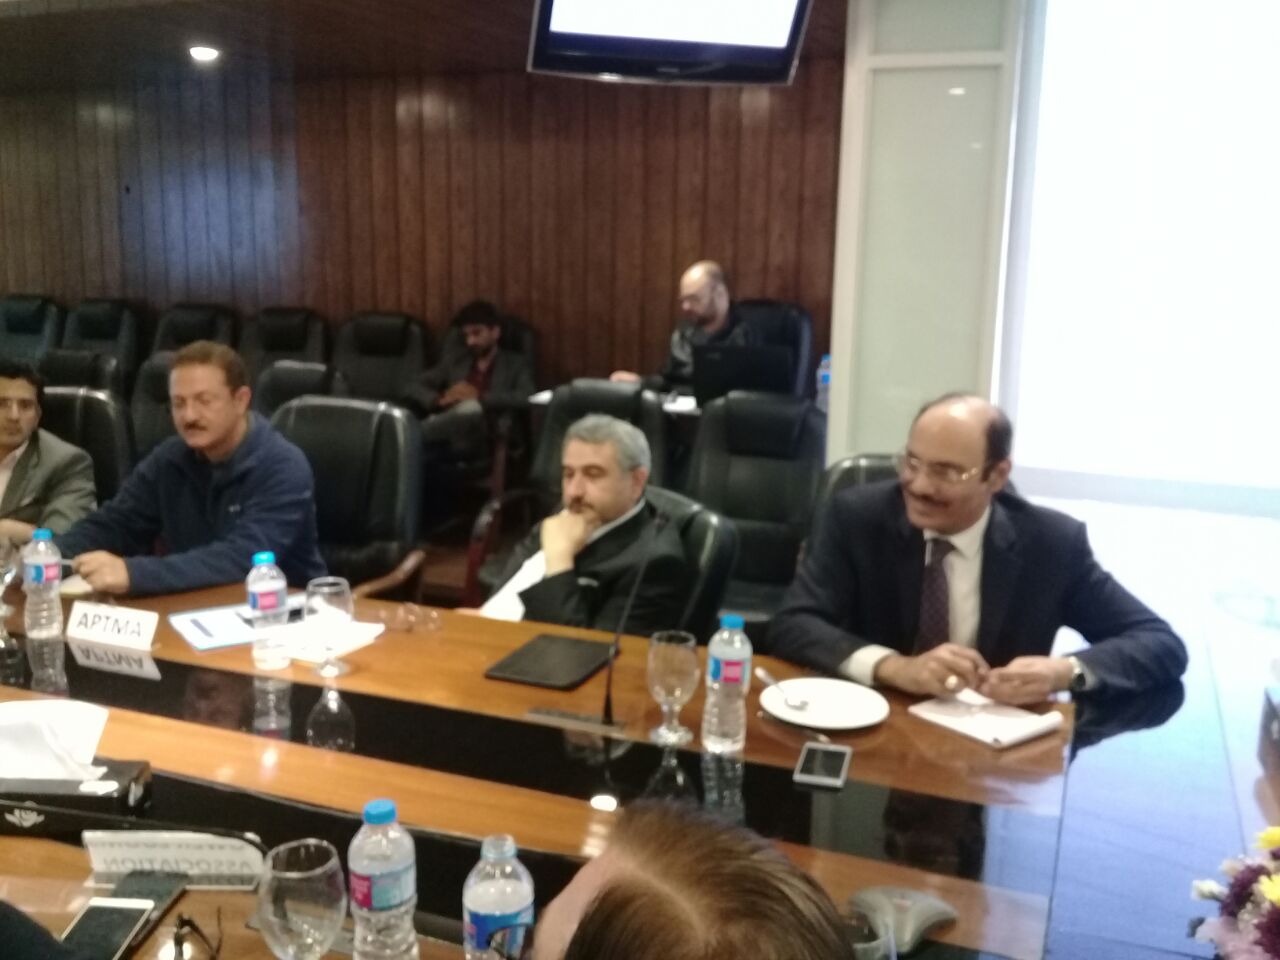 https://aptma.org.pk/wp-content/uploads/2021/10/Joint-Meeting-of-the-Textile-Industry-Associations-10.jpg